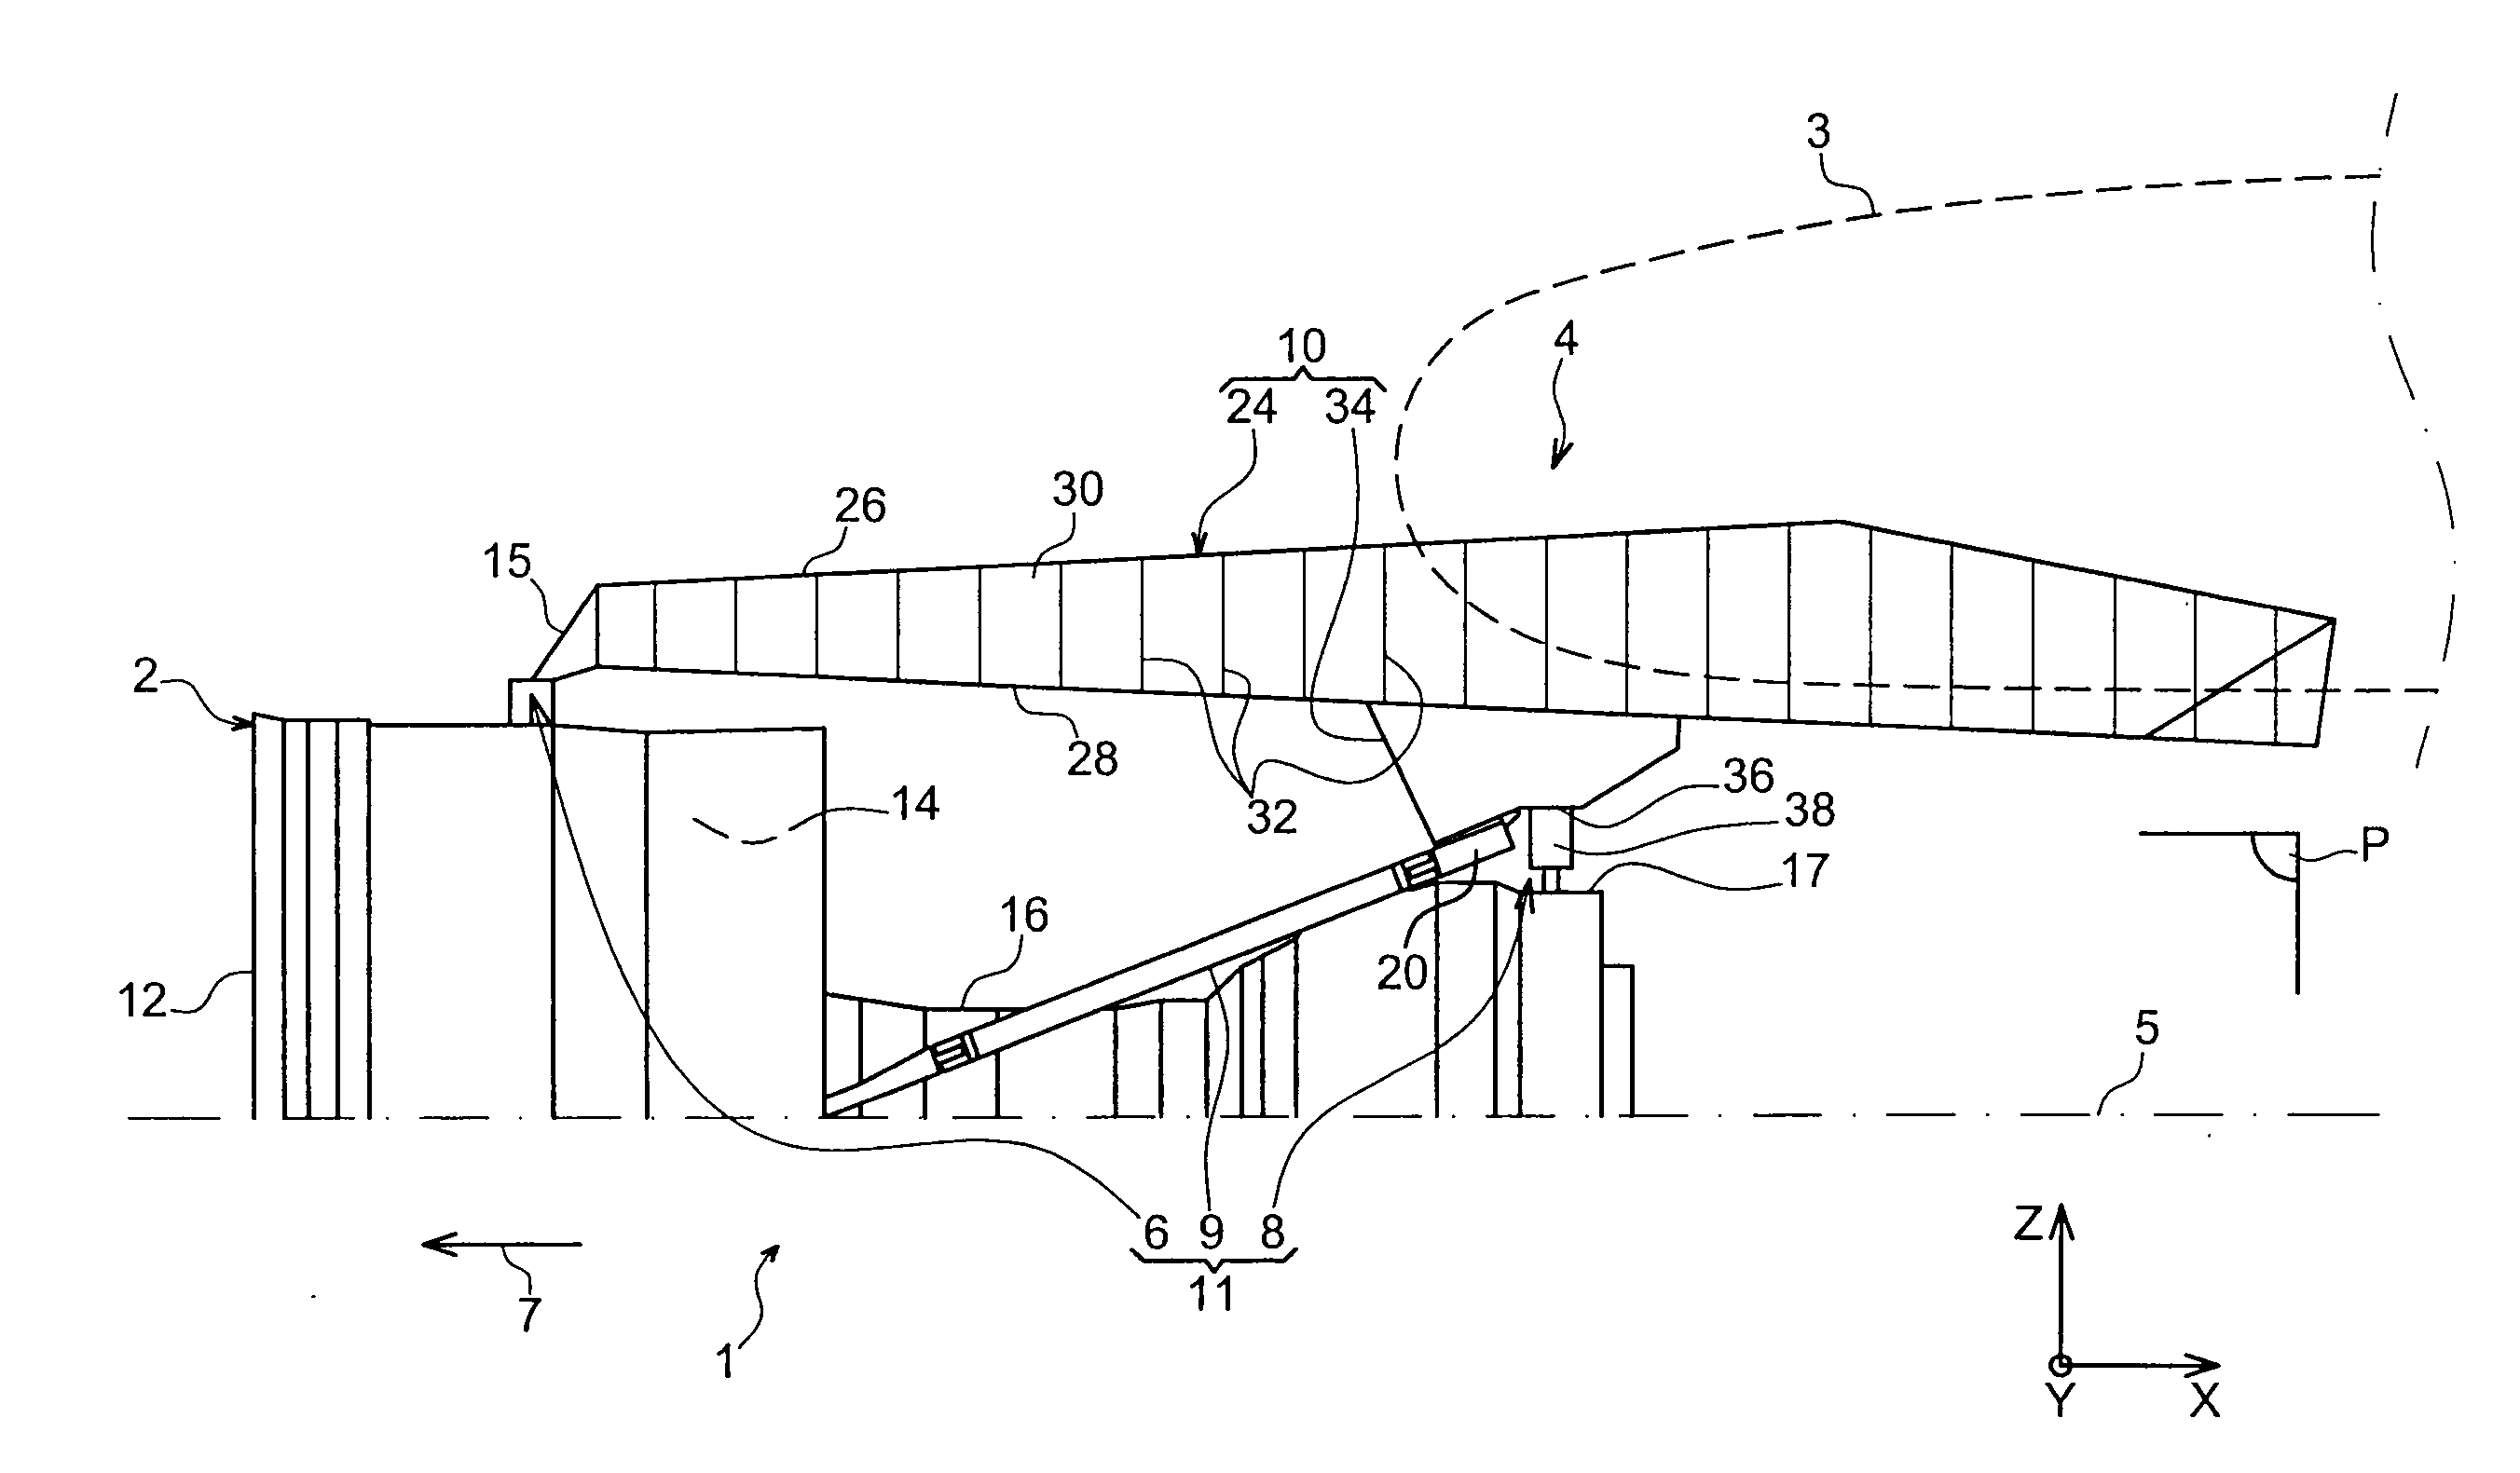 Engine Assembly for an Aircraft Comprising an Engine as Well as an Engine Mounting Structure for Such an Engine